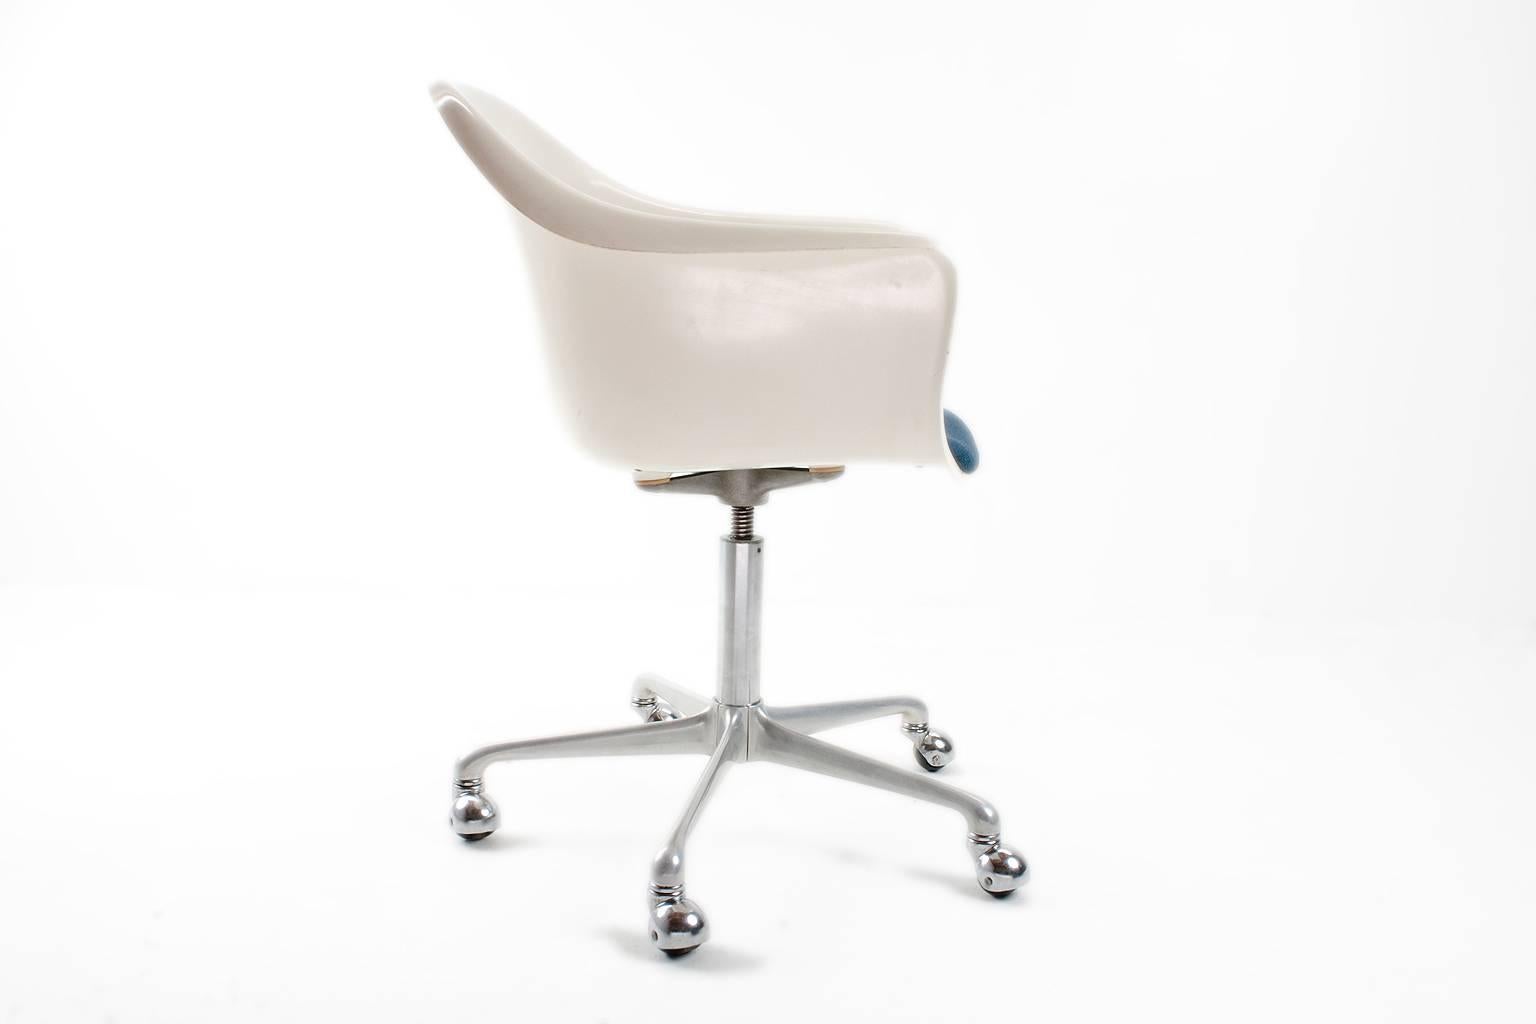 Early 1960s Interlubke desk chair in fiberglass with aluminium swivel foot designed by K. Schäfer for the German office and home furniture manufacture Lübke (changed later to Interlübke.) New upholstered in a green/blue good quality furniture